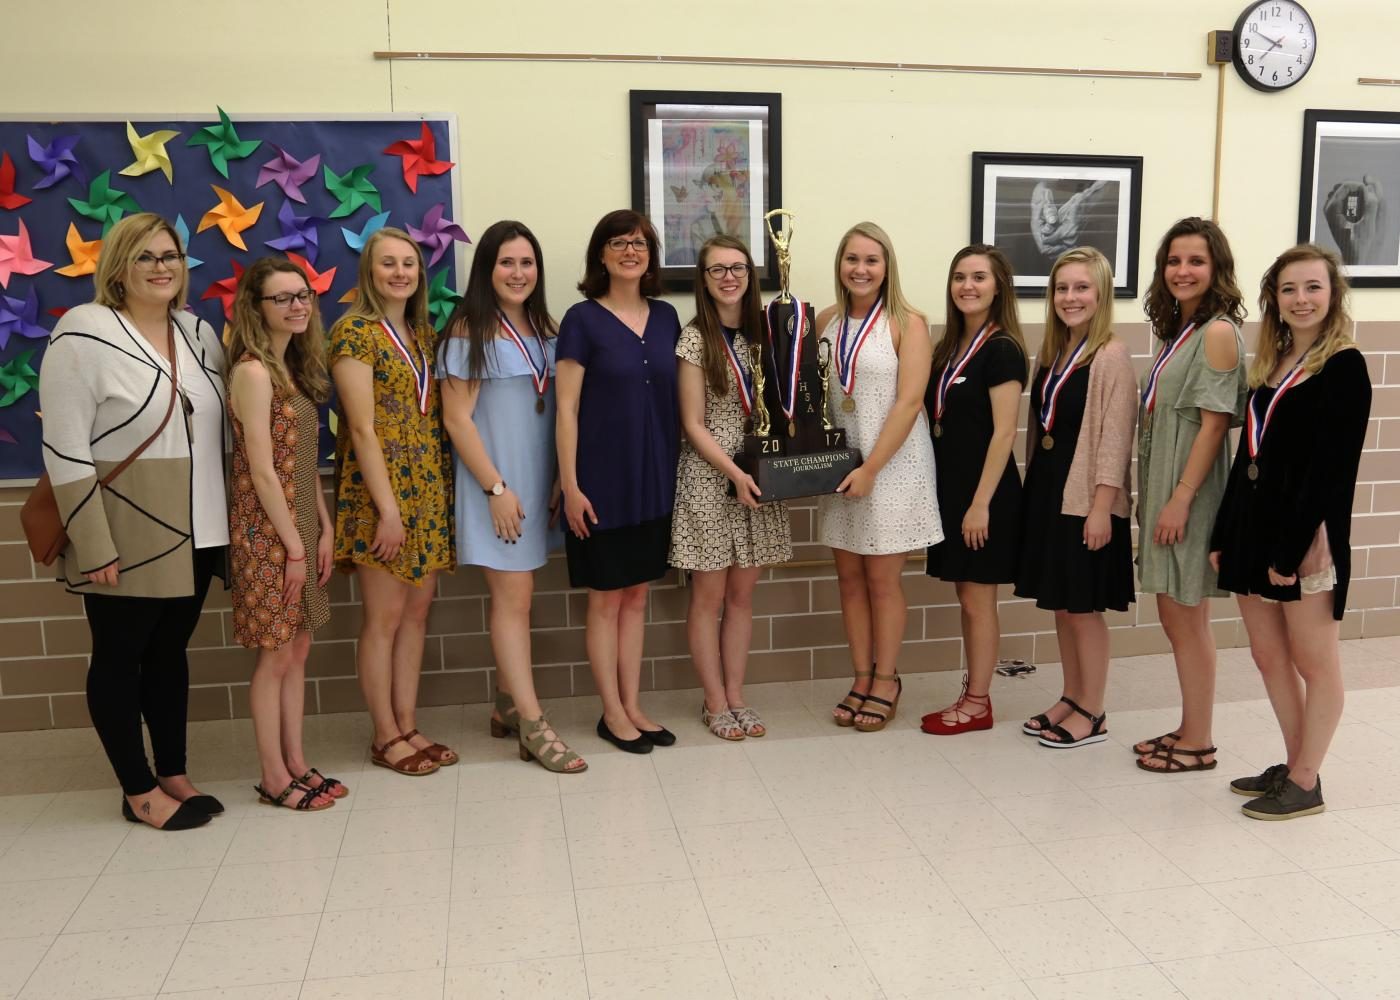 Nine members and the two advisers of the EHS journalism team stand next to the championship trophy at the District 7 School Board Meeting on May 8. From left: Ms. Mudge, Maddi Lammert, Jane Thompson, Jamie Skigen, Mrs. Thrun, Erin Morrisey, Morgan Goebel, Emma Lipe, Sophie Kraus, Jade Weber and Nara Markowitz.